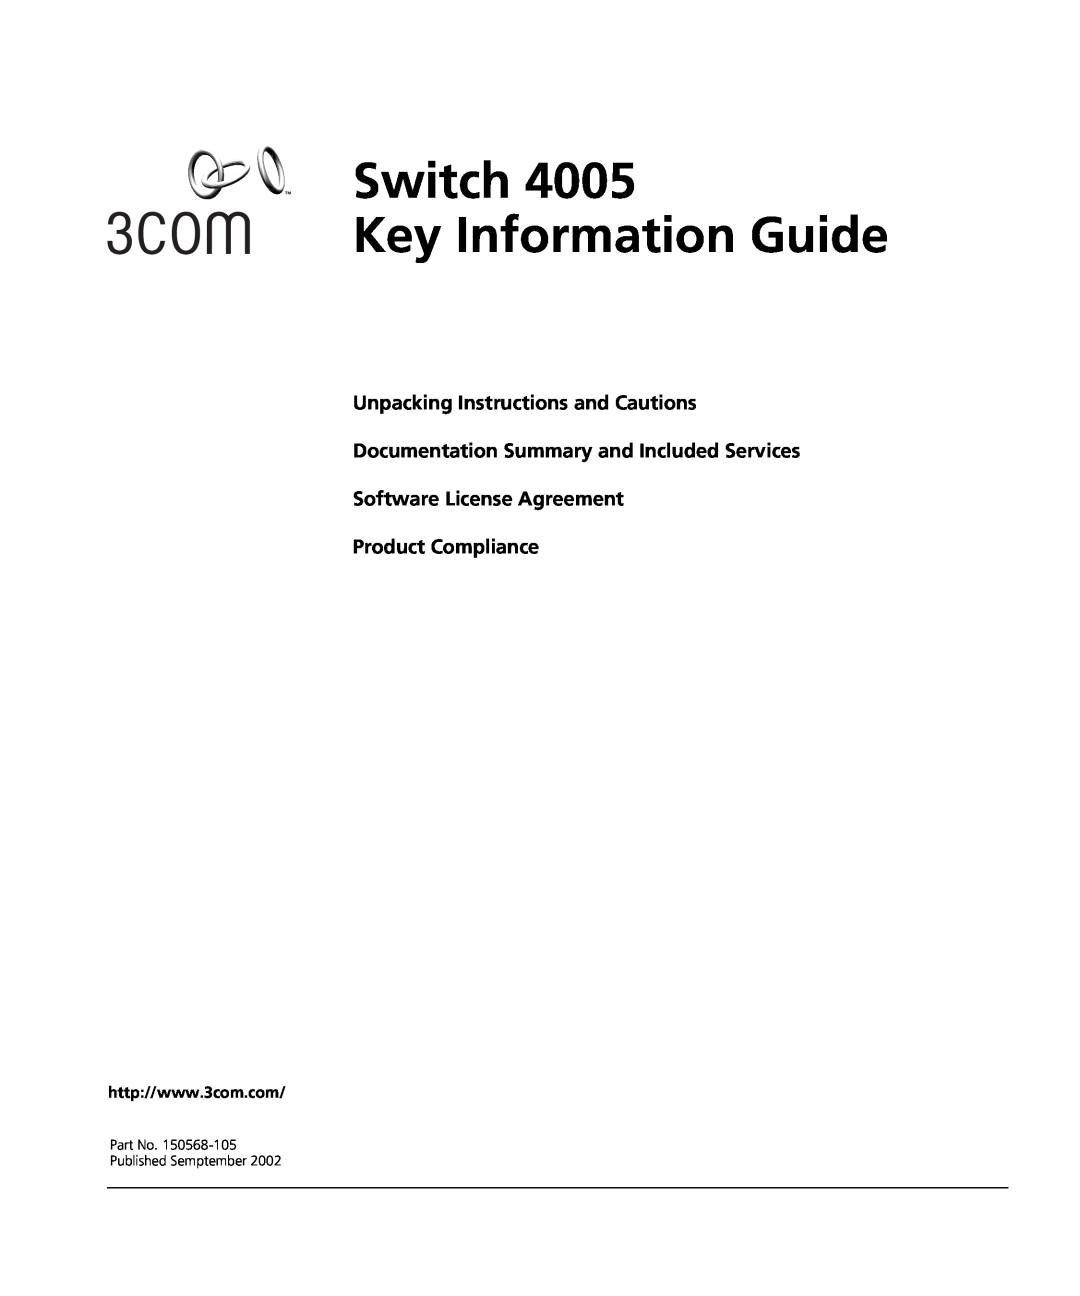 3Com 4005 manual Switch Key Information Guide, Unpacking Instructions and Cautions 